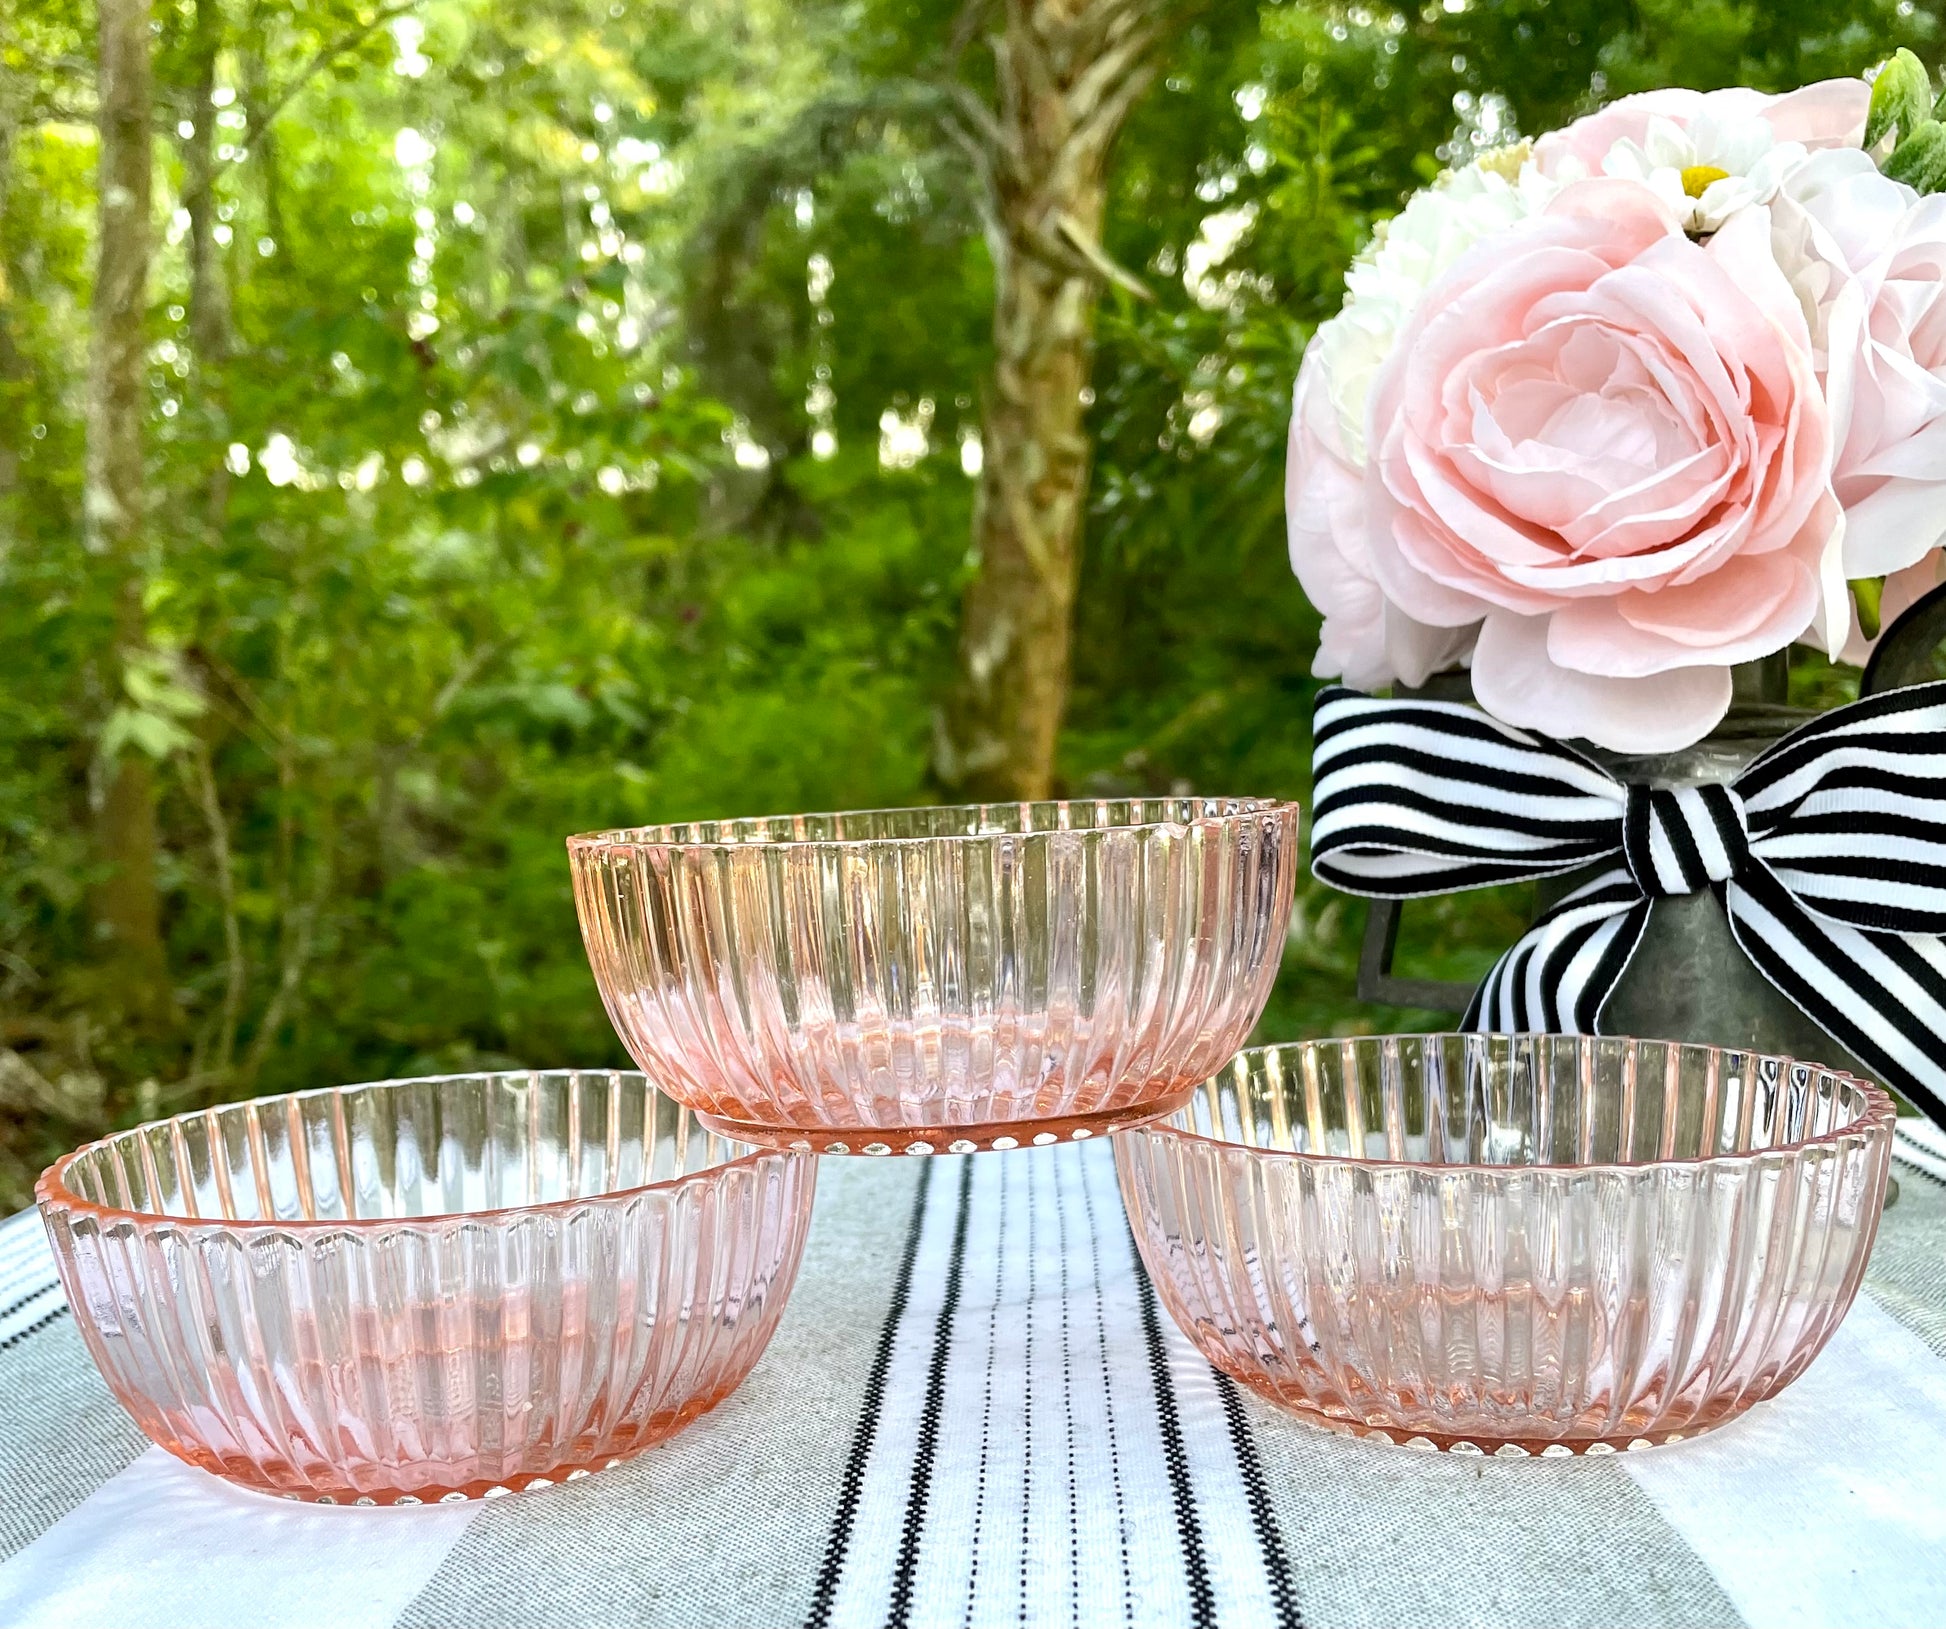 Hocking Anchor Set of Company The Depression Mary Bowls – Bird Queen Glass Pink Antique 3 Broken